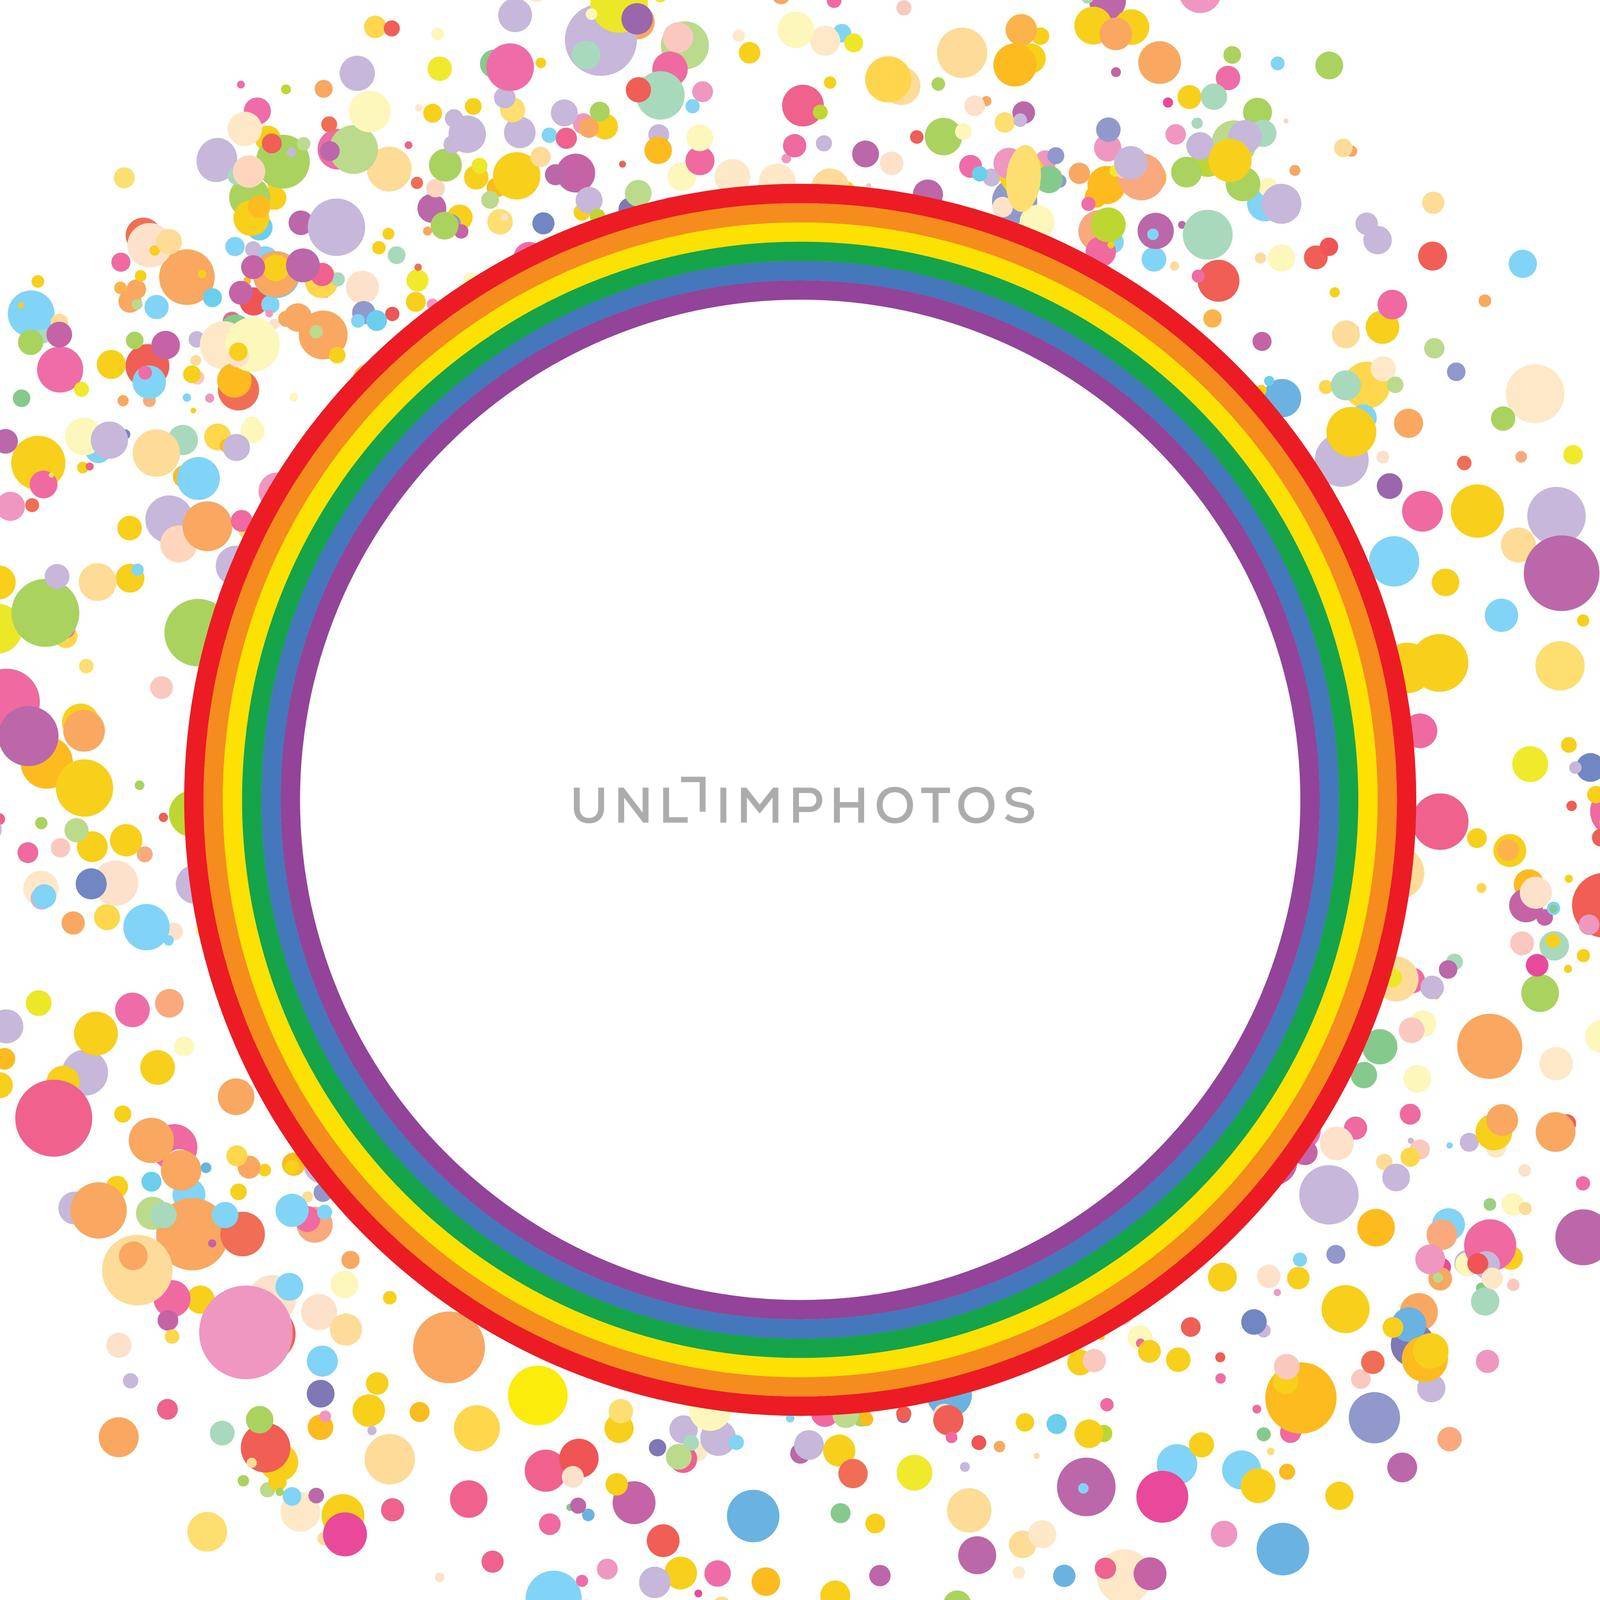 Flag LGBT icon, round frame with confetti. Template design, vector illustration. Love wins. LGBT symbol in rainbow colors. Gay pride collection by allaku